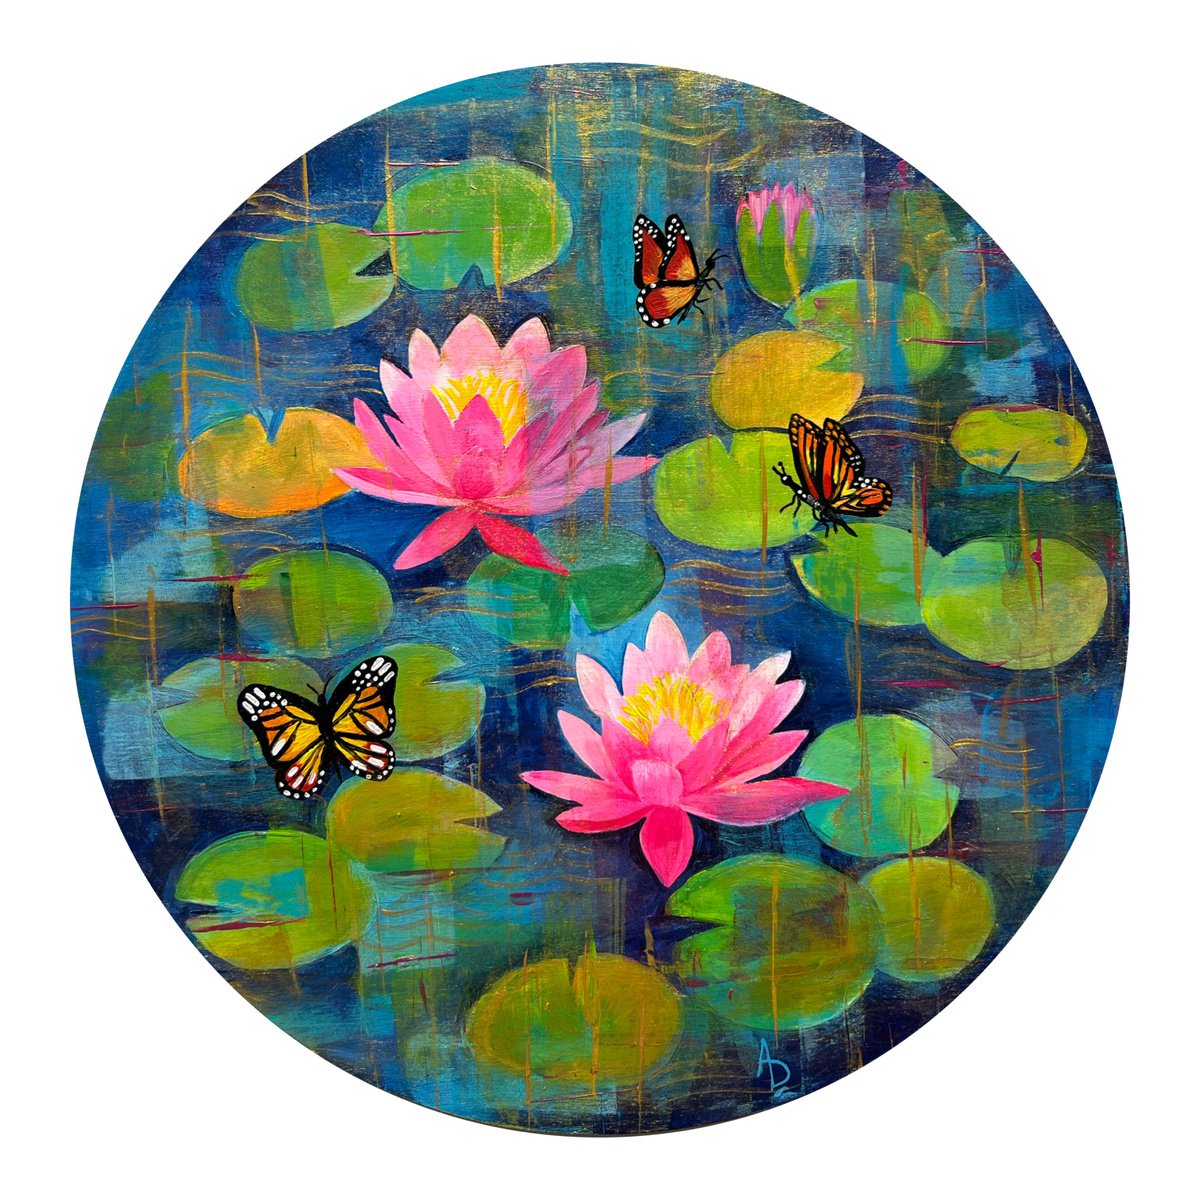 Water Lilies and Butterflies - II by Amita Dand